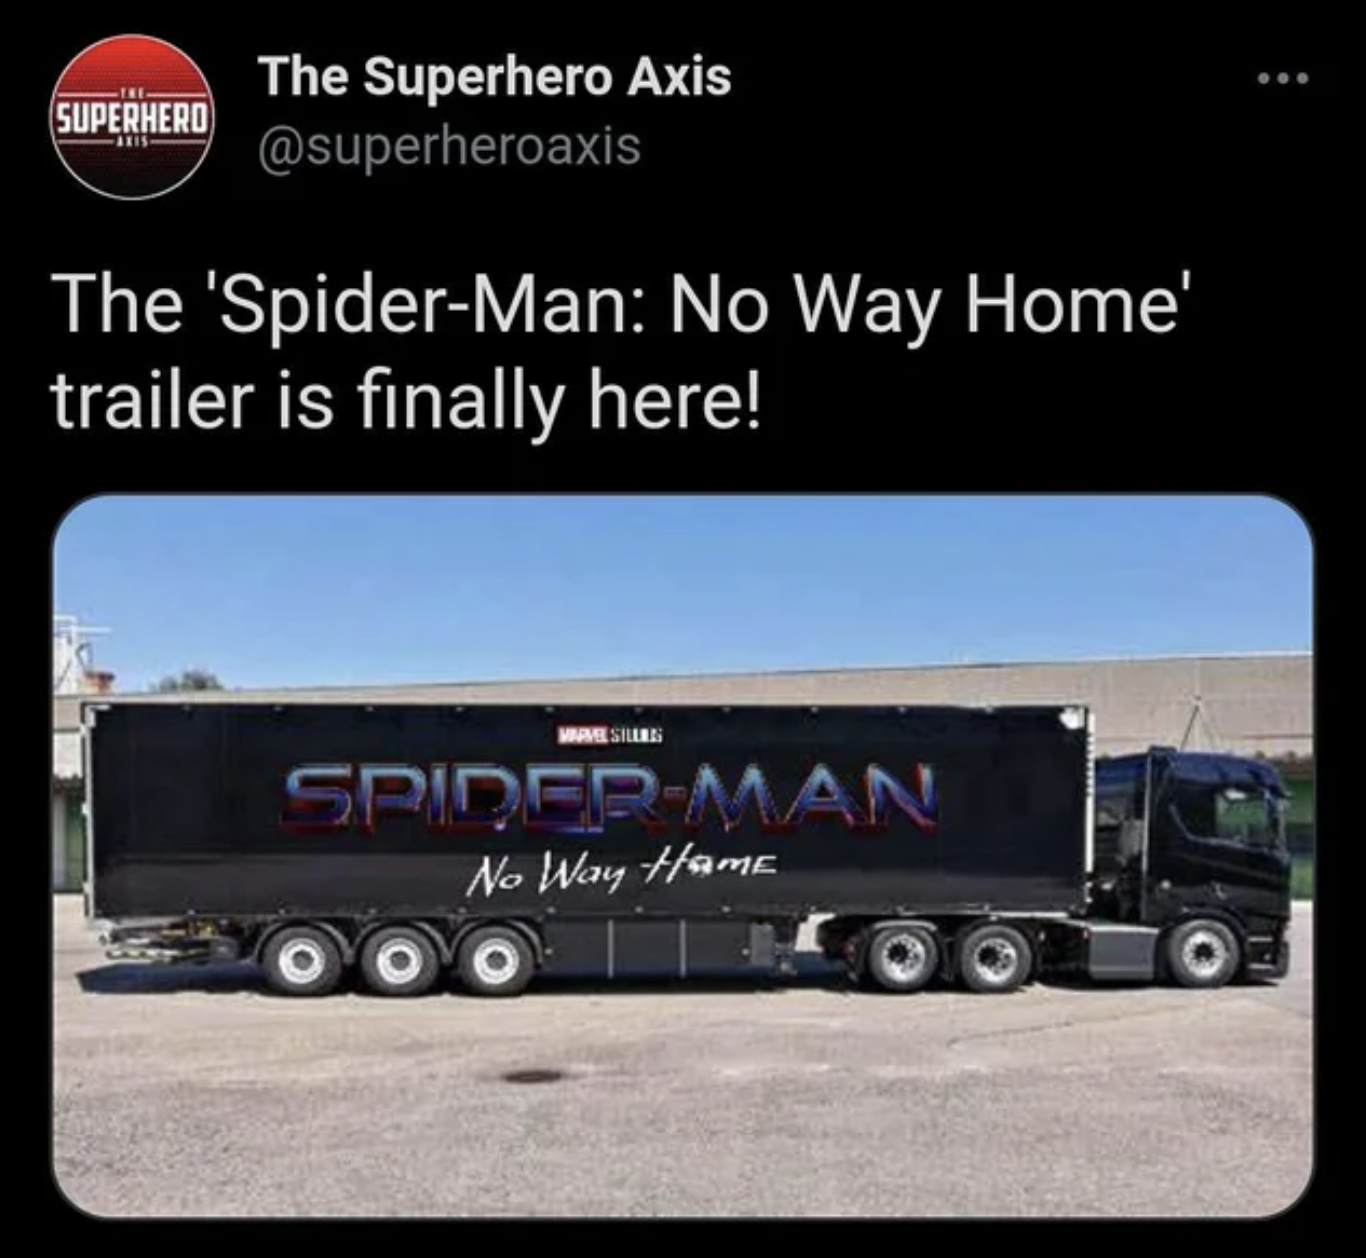 Pictures that techincally tell the truth - Superhero The Superhero Axis The 'SpiderMan No Way Home' trailer is finally here! Meshang SpiderMan No Way Hame